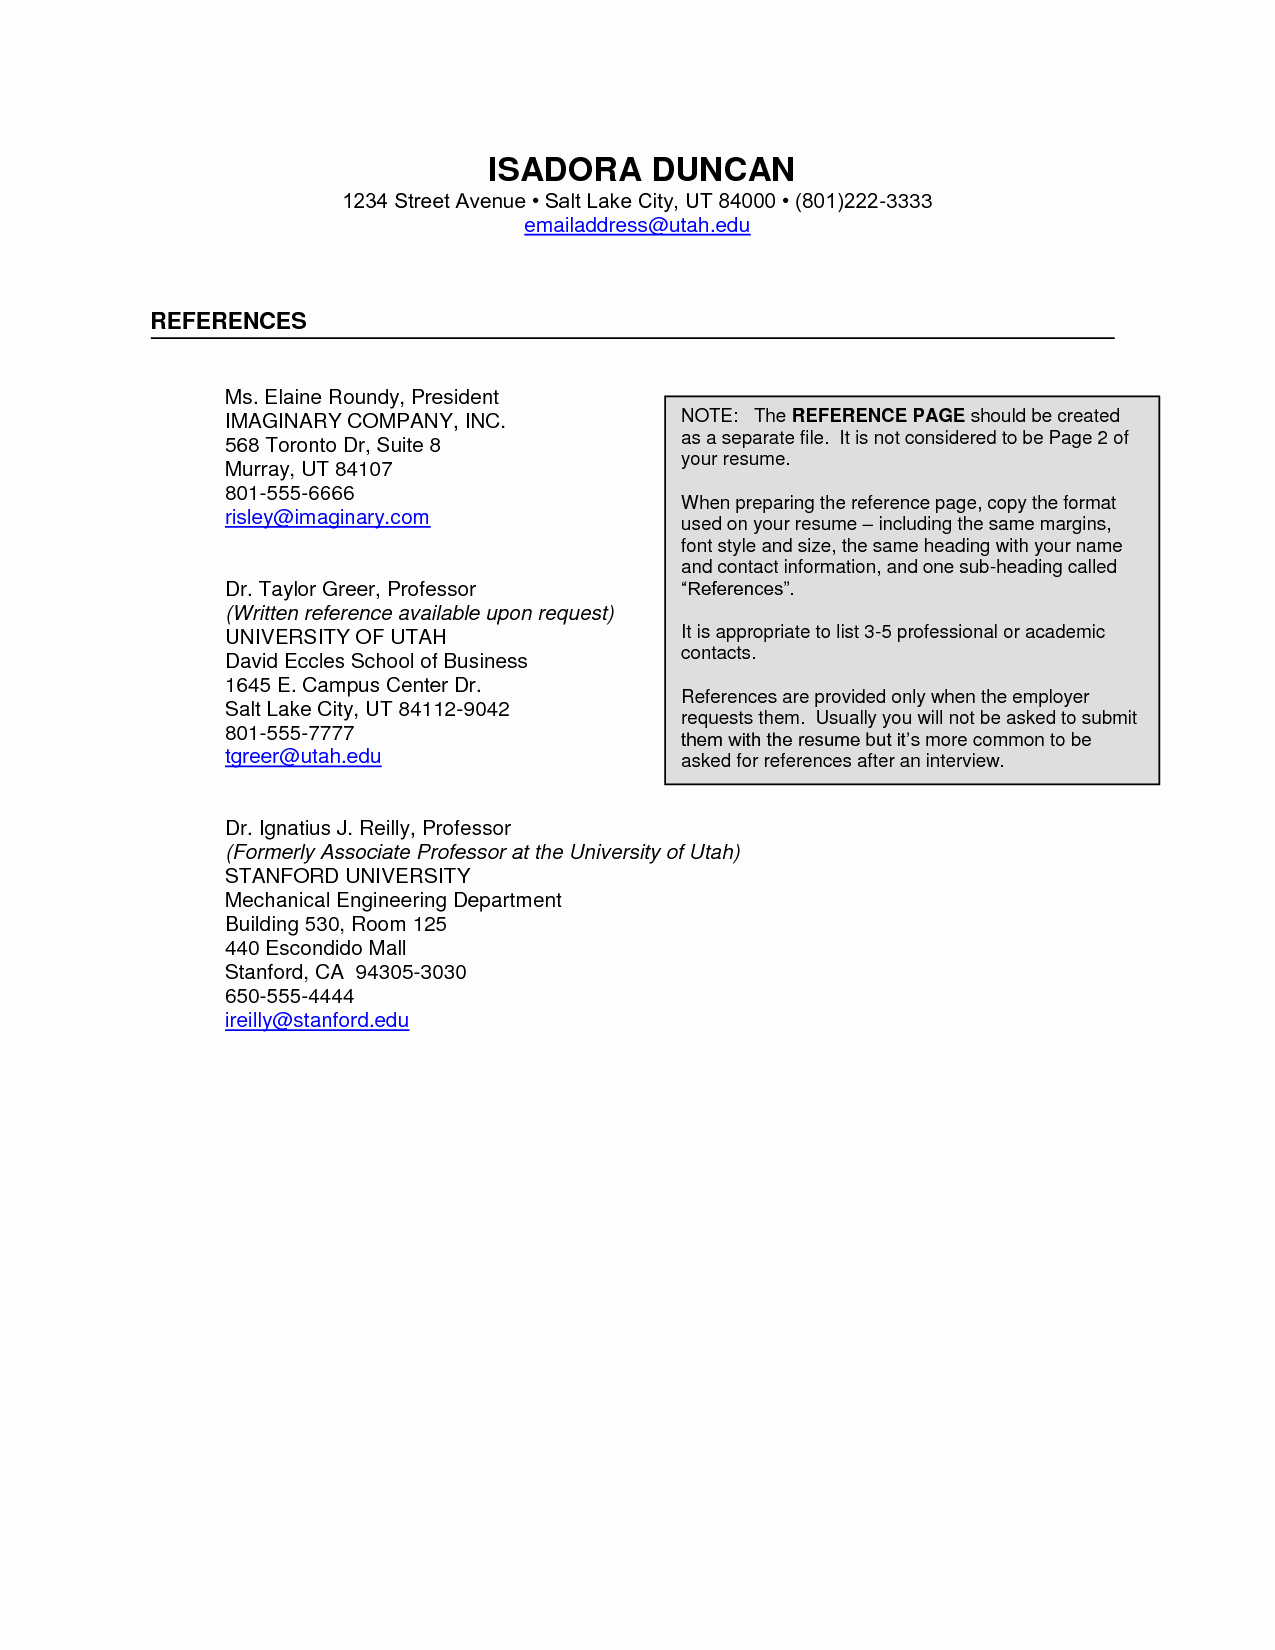 References Page format for Resume Unique Resume Professional References Resume Ideas